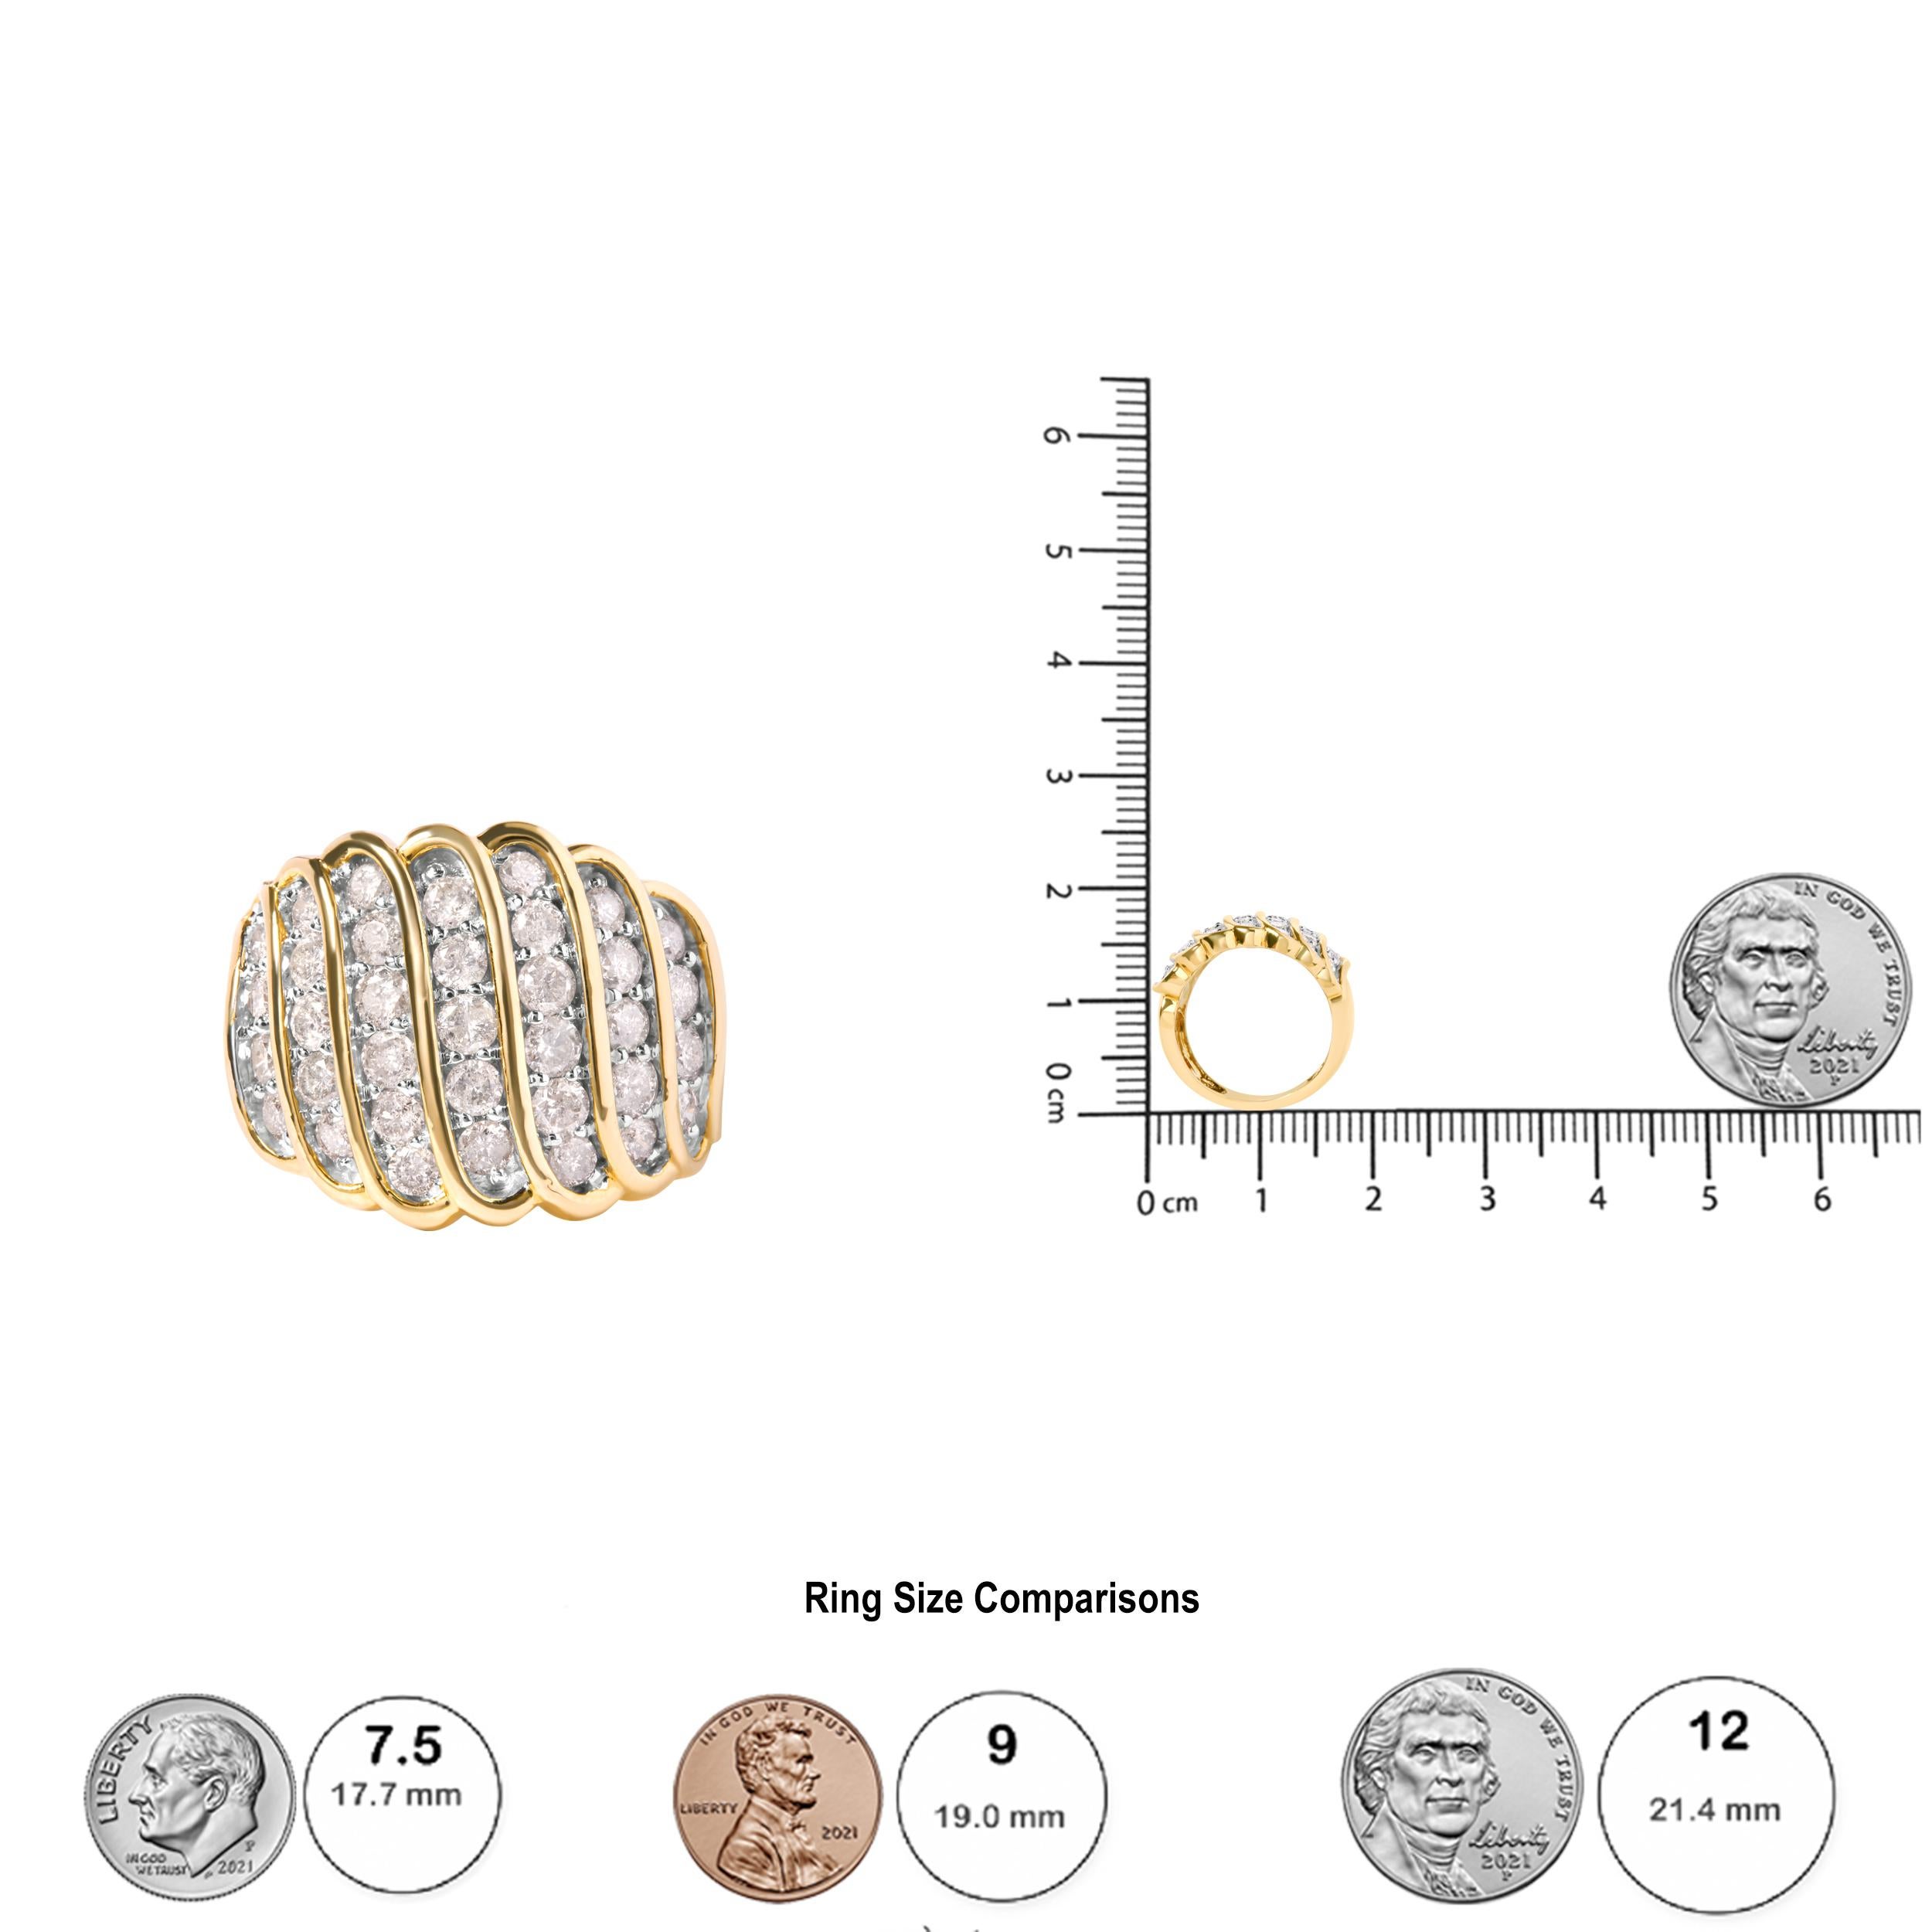 Strikingly beautiful, this stunning multi-row diamond band ring is crafted from genuine 10K Yellow gold, a metal that will stay tarnish free for years to come! The ring has a vertical multi-row design that is separated by curved 